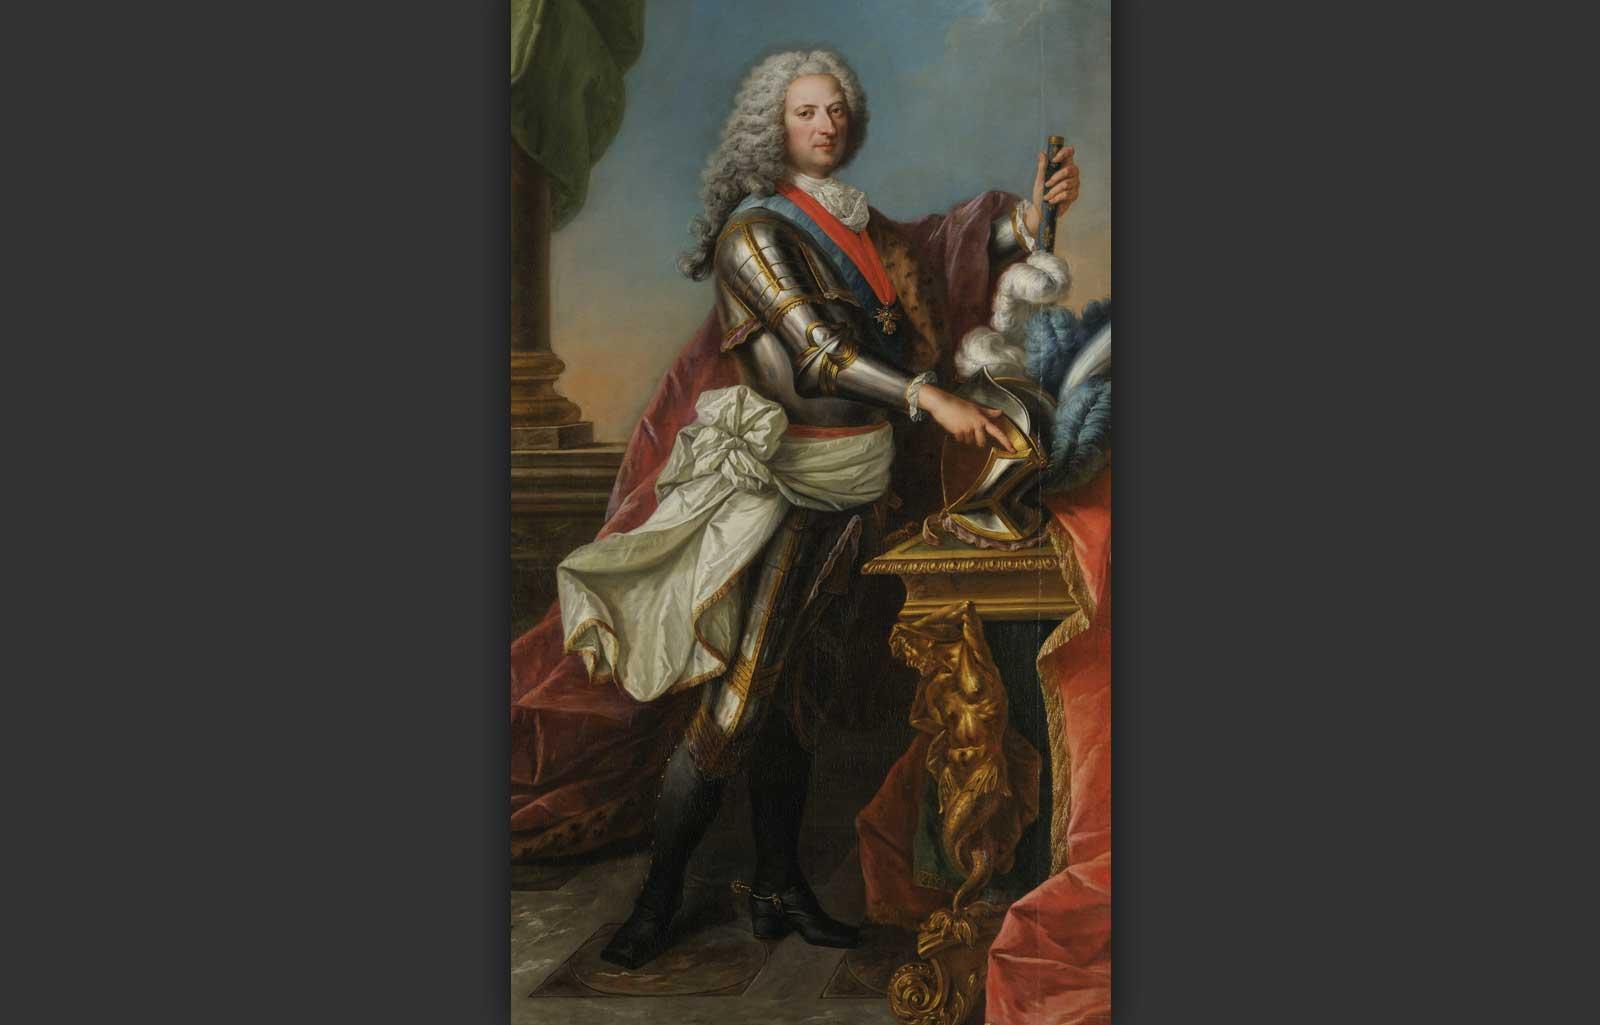 Philippe II, Duke of Orléans, 1715-1723, Attributed to Guy Noël Aubry.